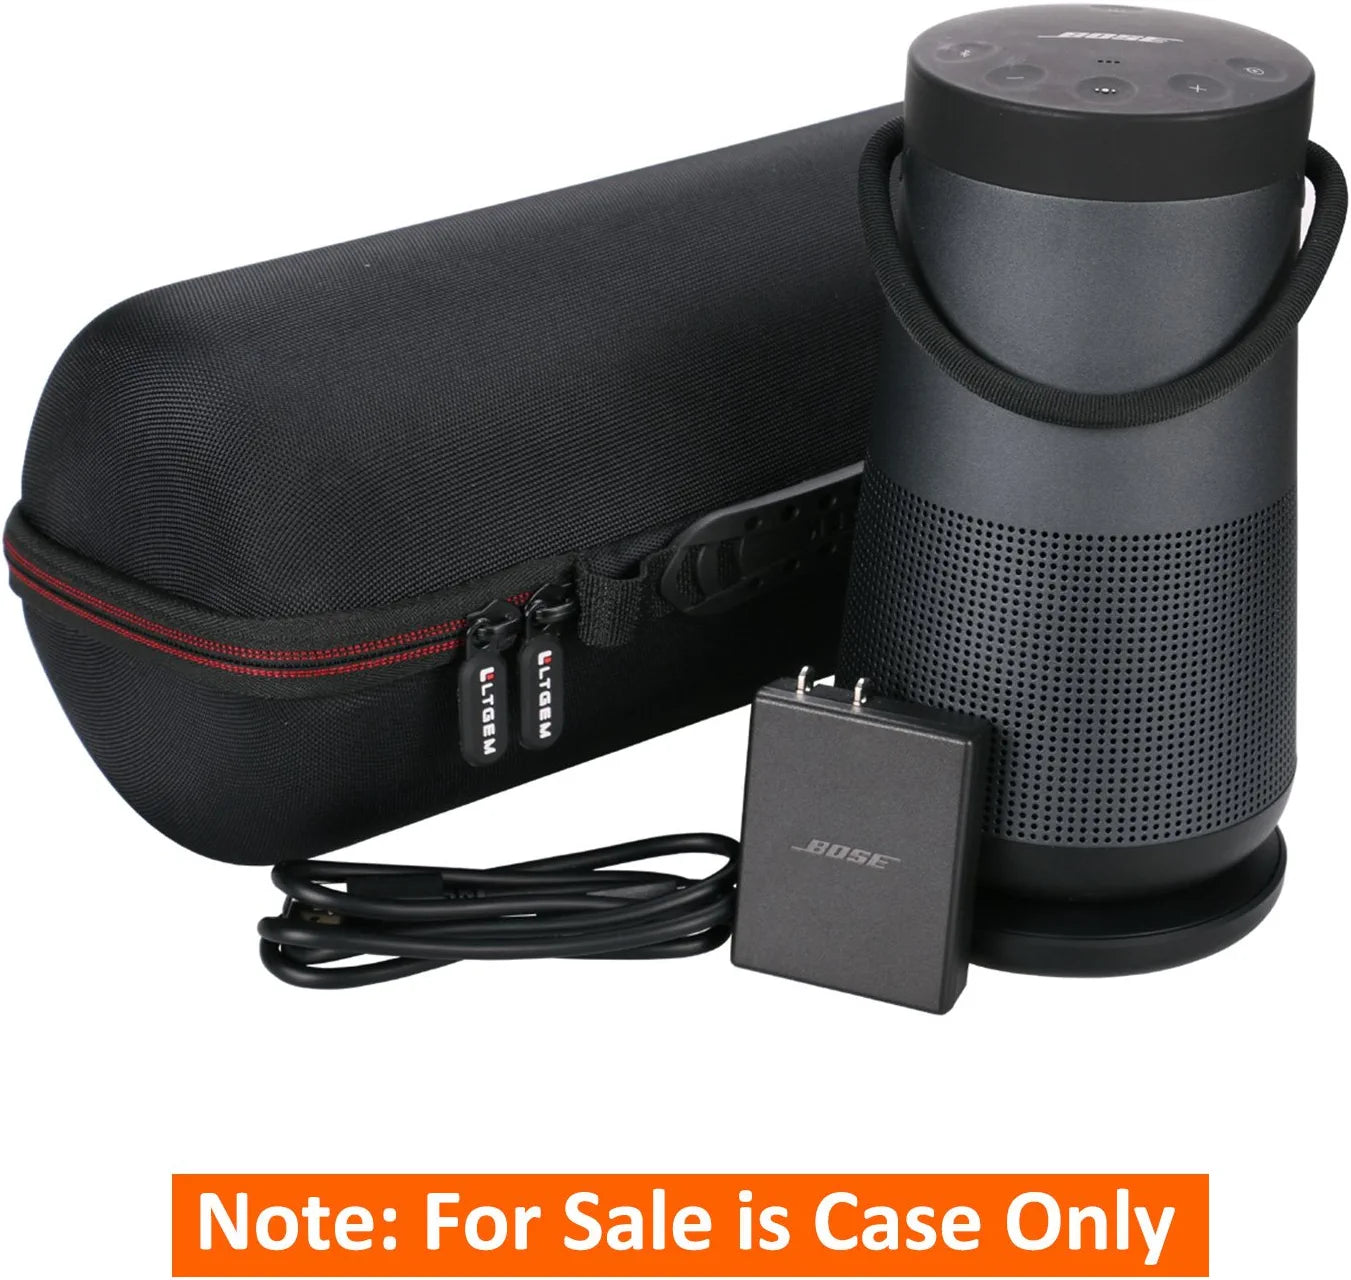 Travel Protective Case for Bose Soundlink Revolve+ or Revolve+ (Series II) Portable & Long-Lasting Bluetooth 360 Speaker (Fits Charging Cradle, AC Adaptor and USB Cable)